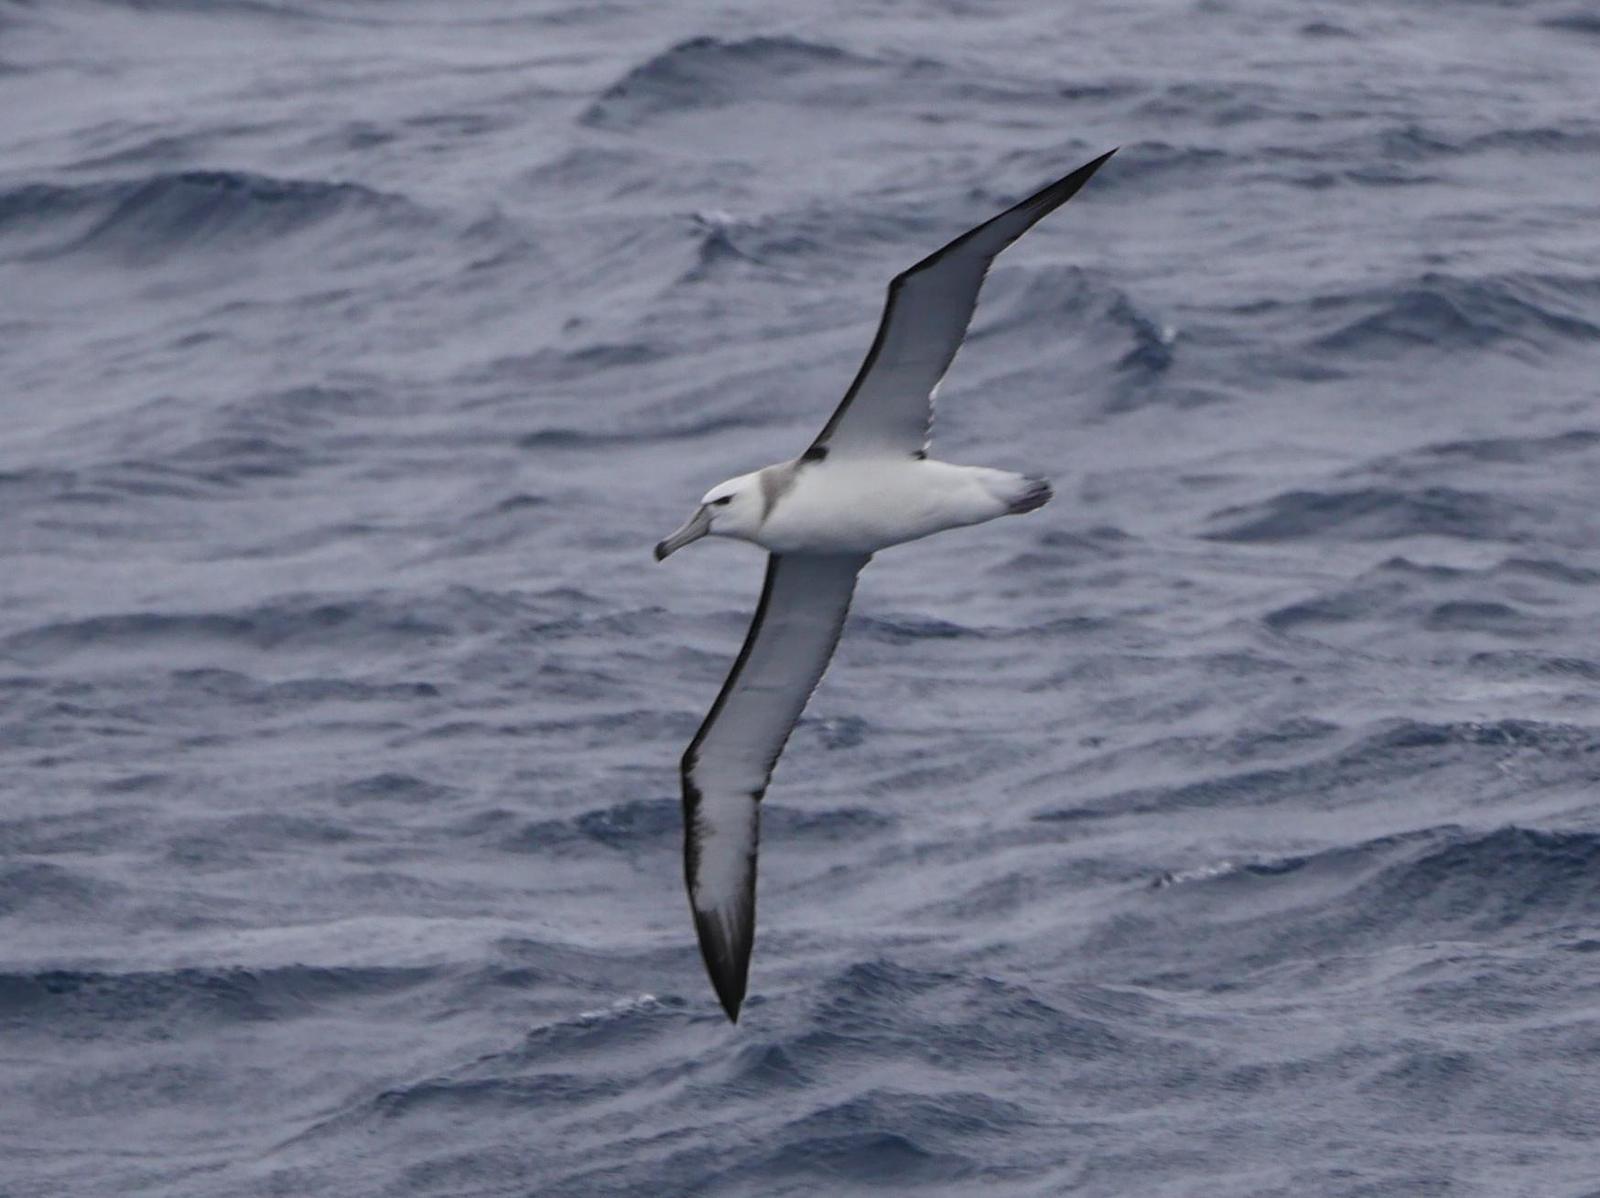 White-capped Albatross Photo by Peter Lowe